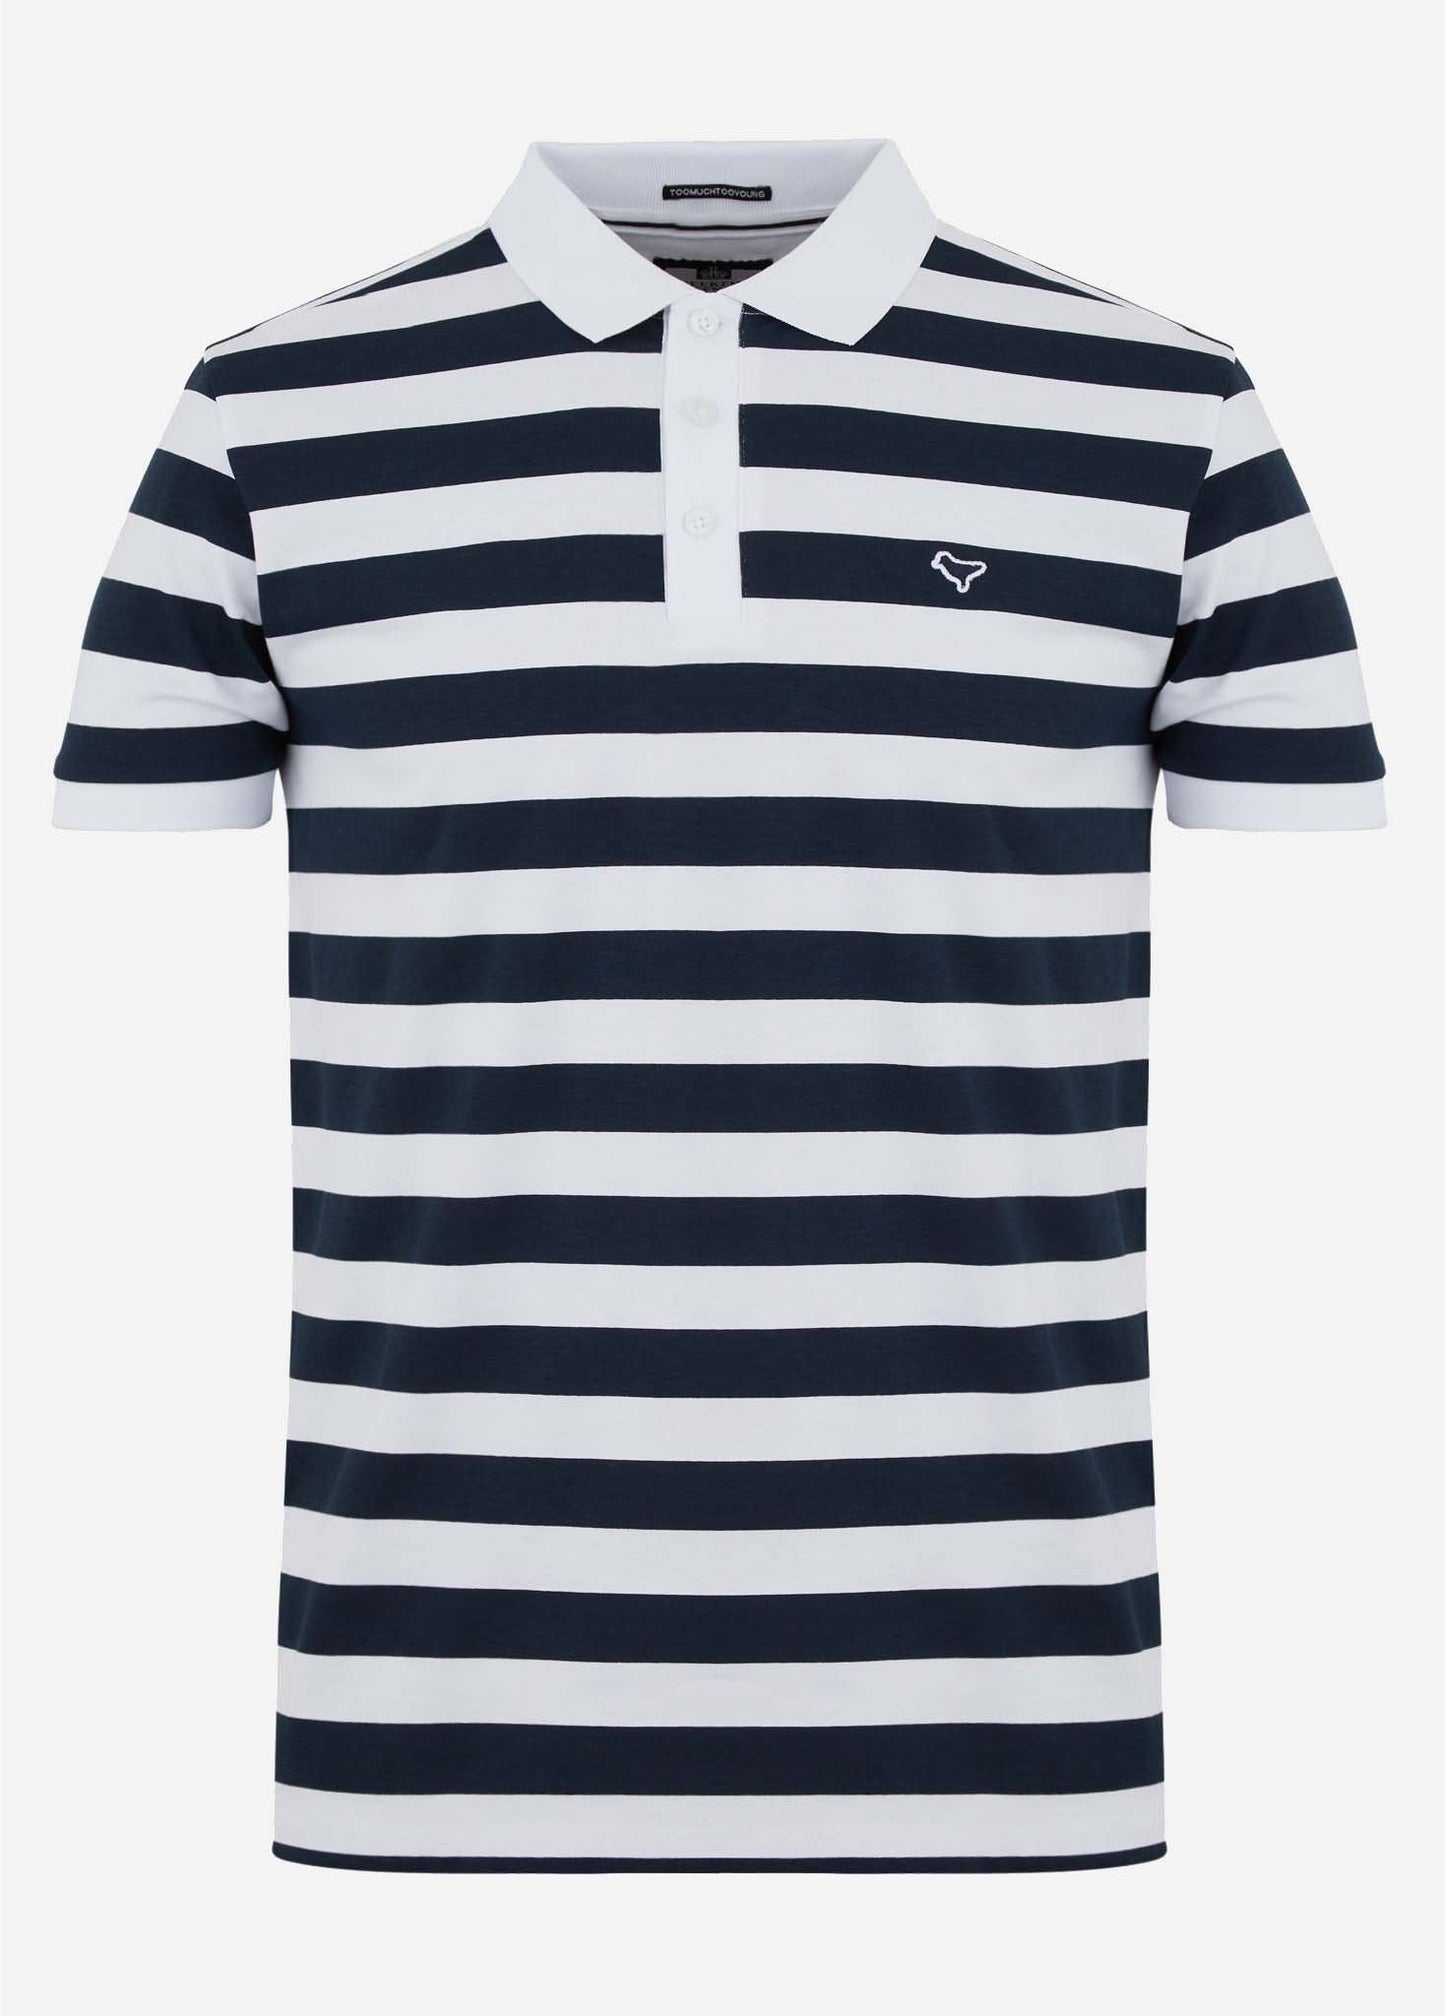 Weekend Offender Polo's  Coffee bay - white 